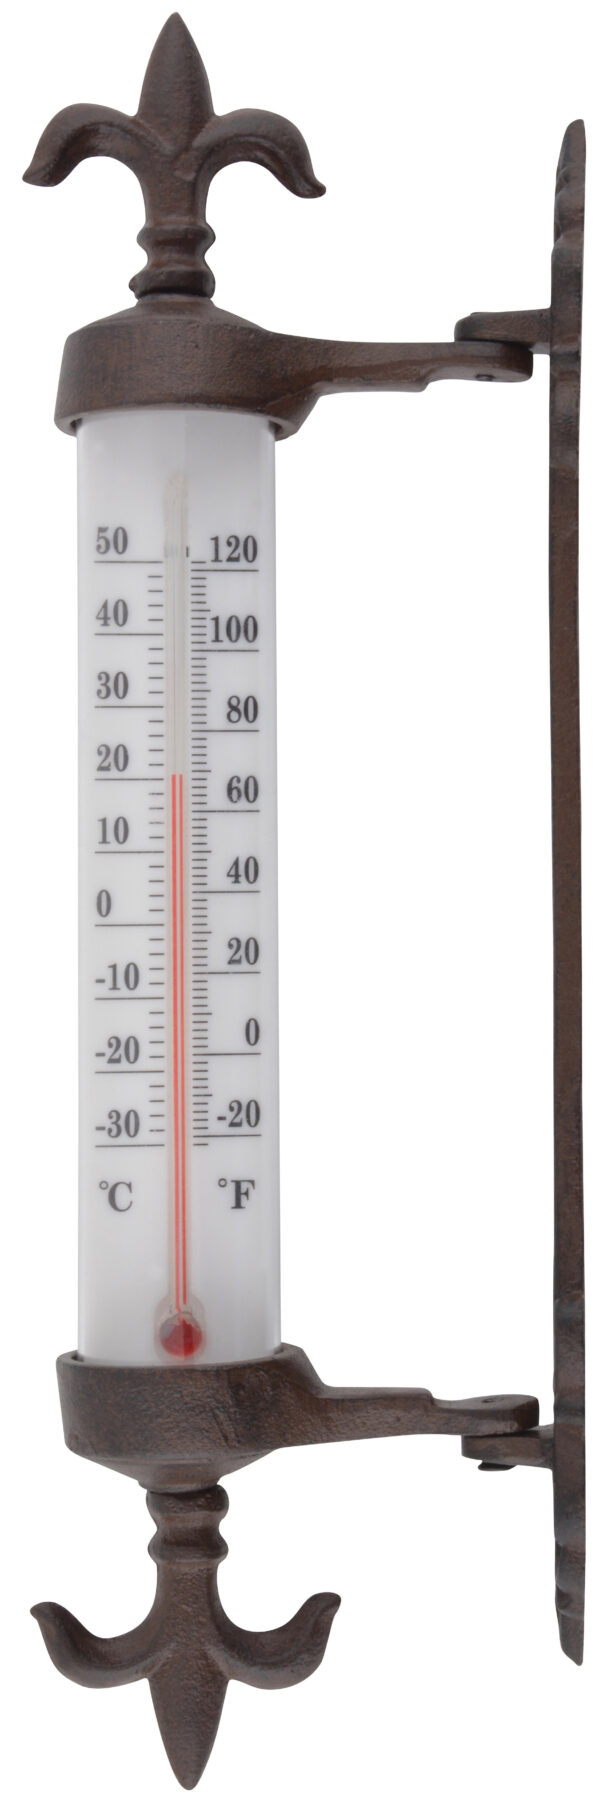 Fallen Fruits - Cast Iron Window Frame Thermometer